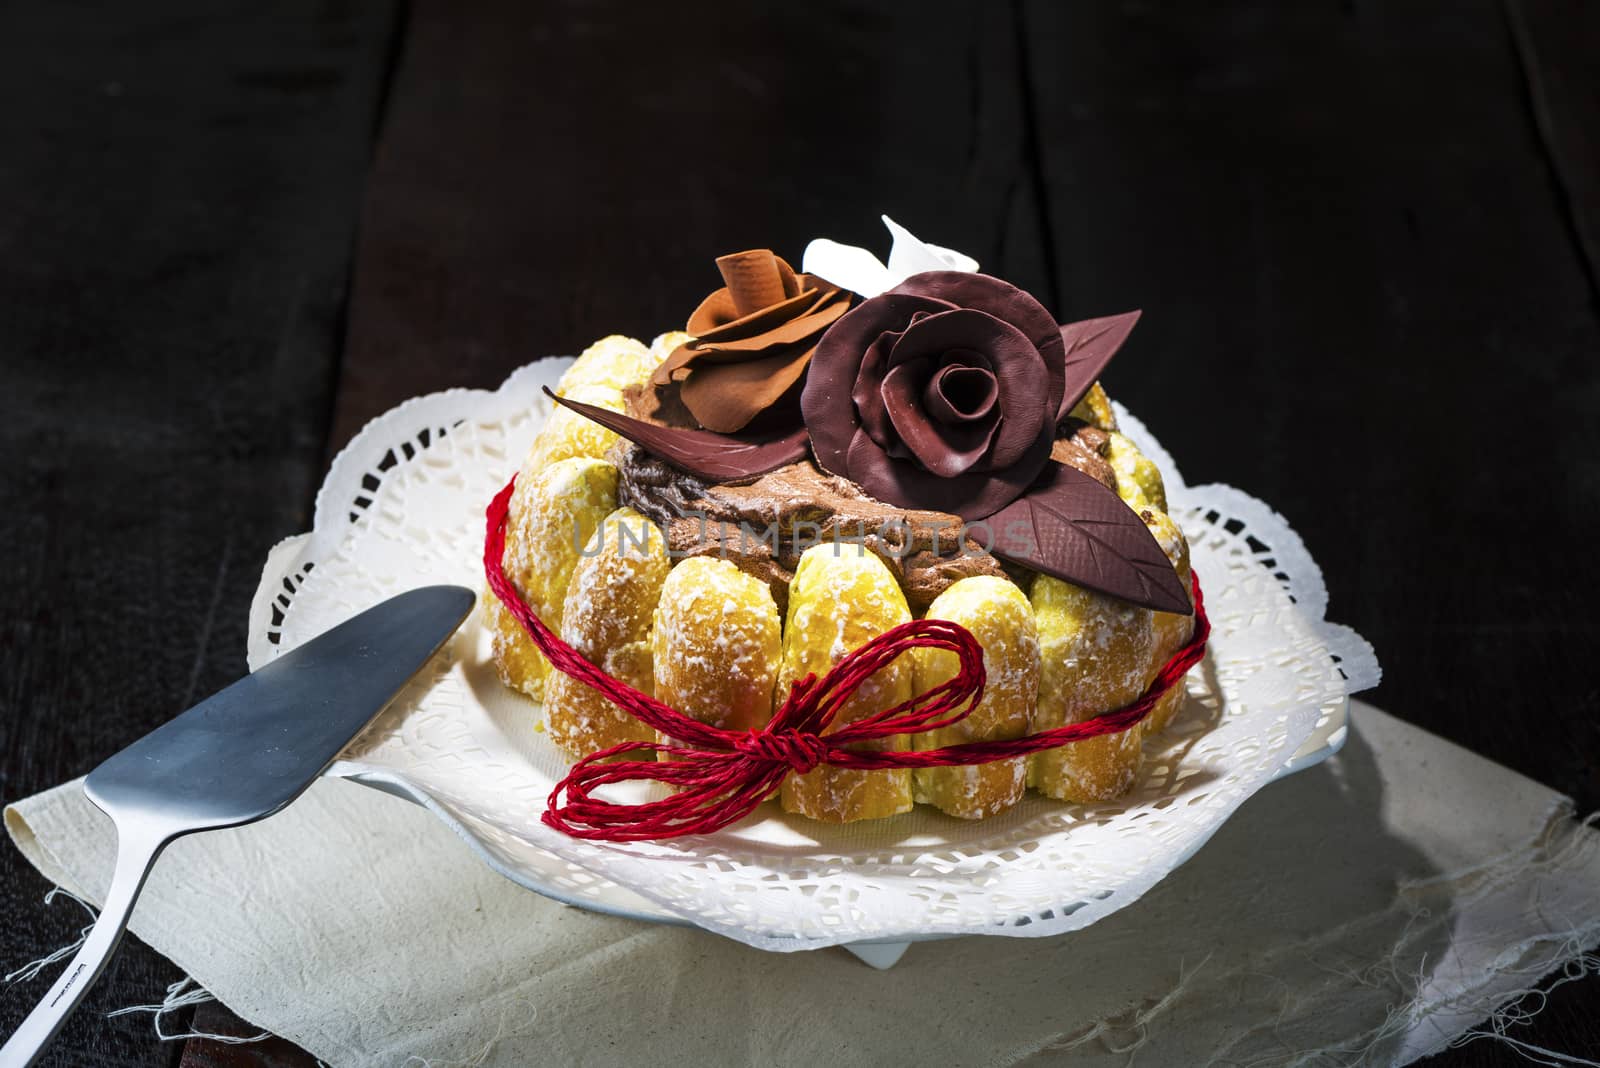 Beautifully decorated chocolate cake topped with roses on cocoa icing and surrounded with freshly baked golden pastries for a delicious dessert or sweet